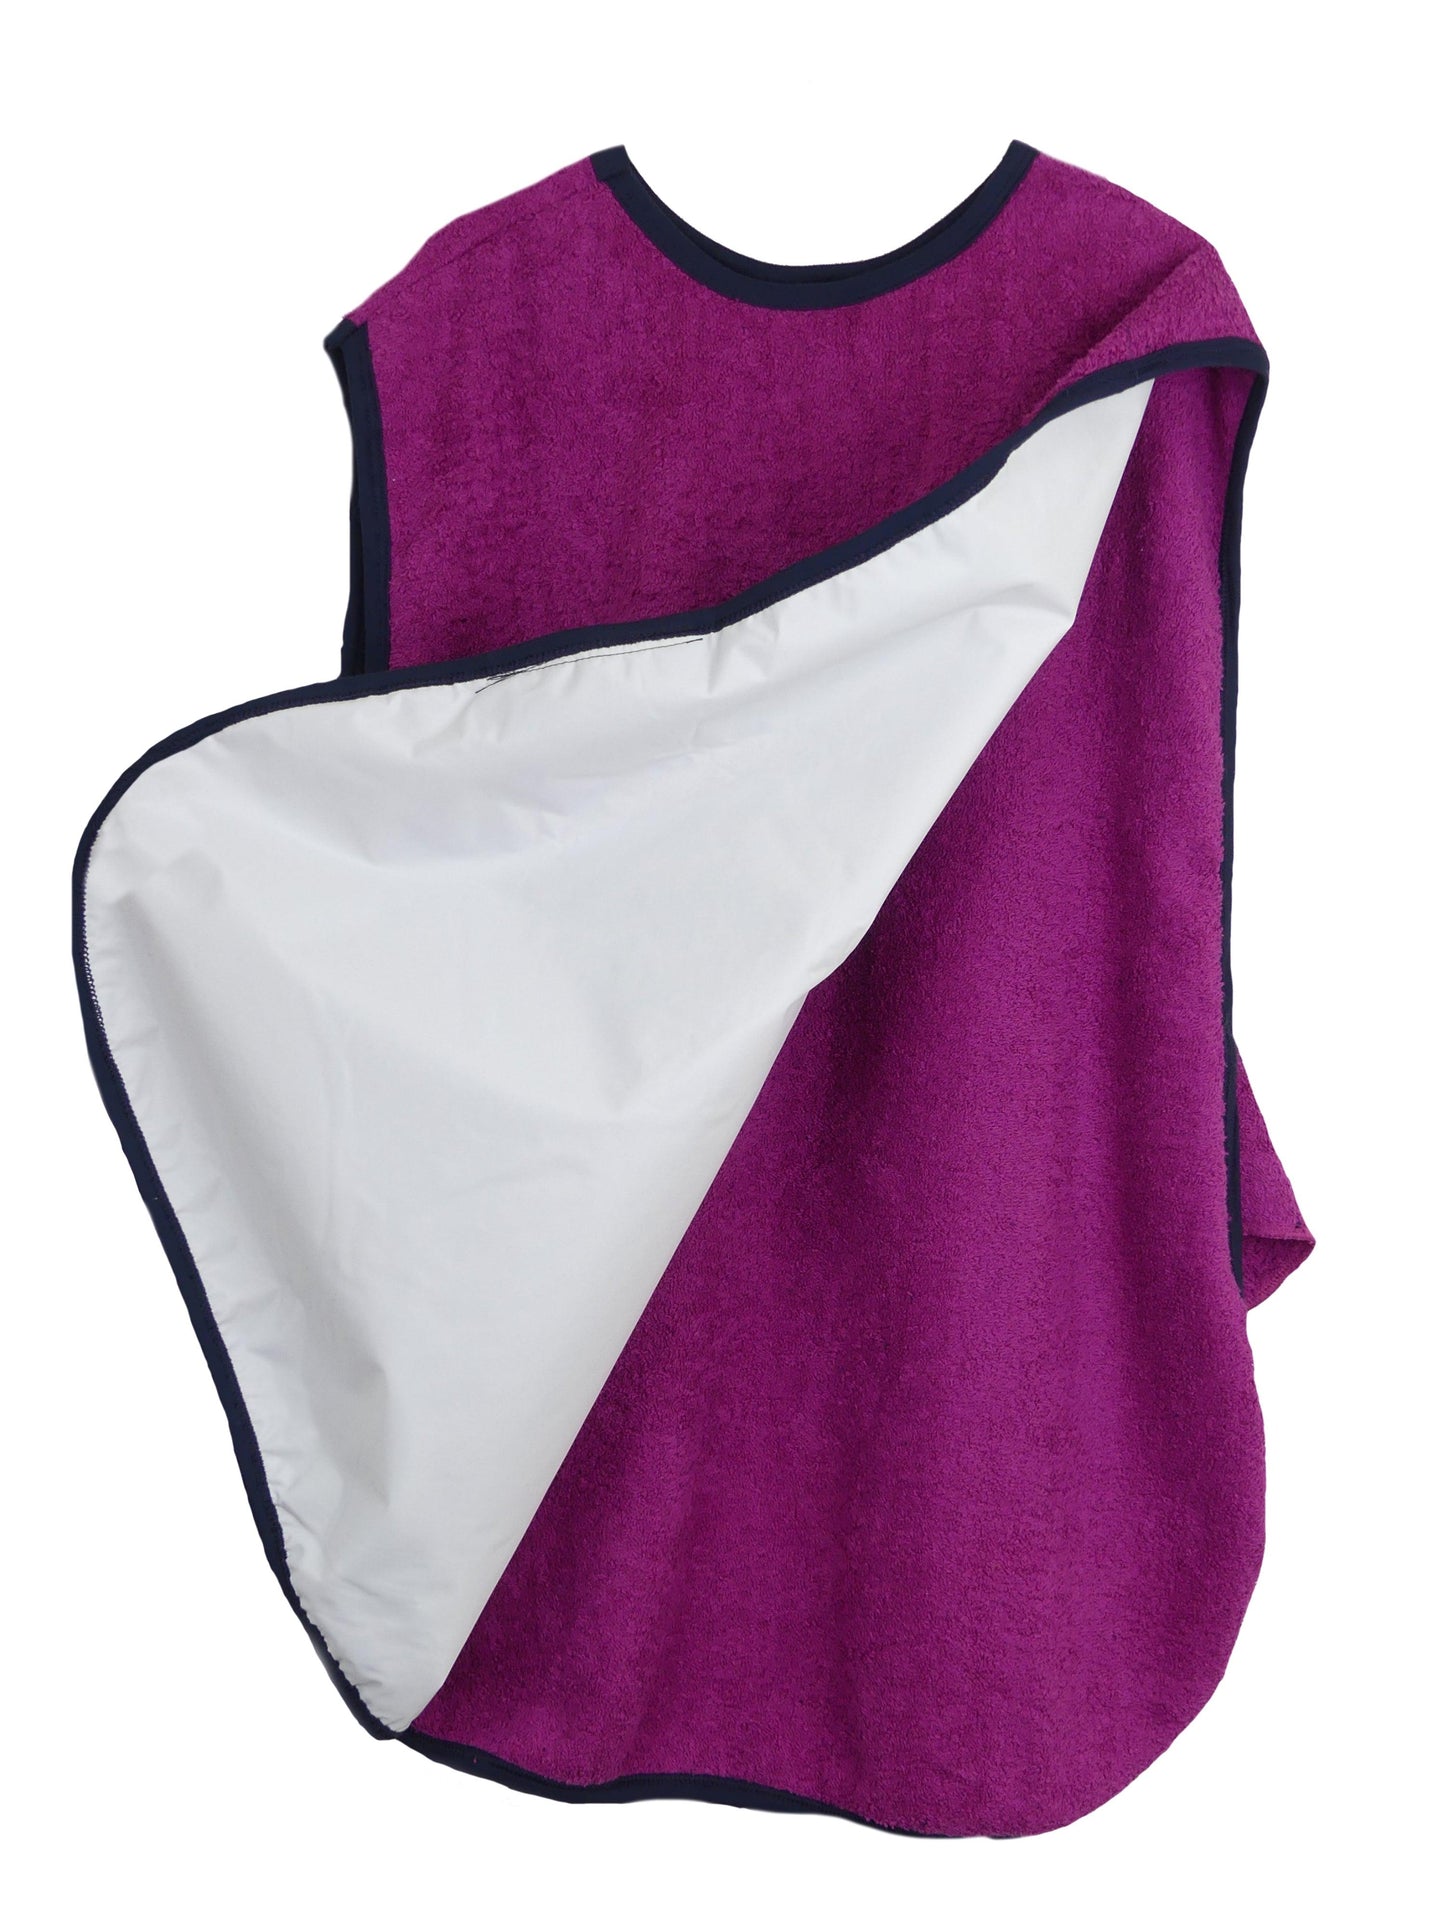 Terry Towelling Tabard with Waterproof Backing - M035 - MEDORIS